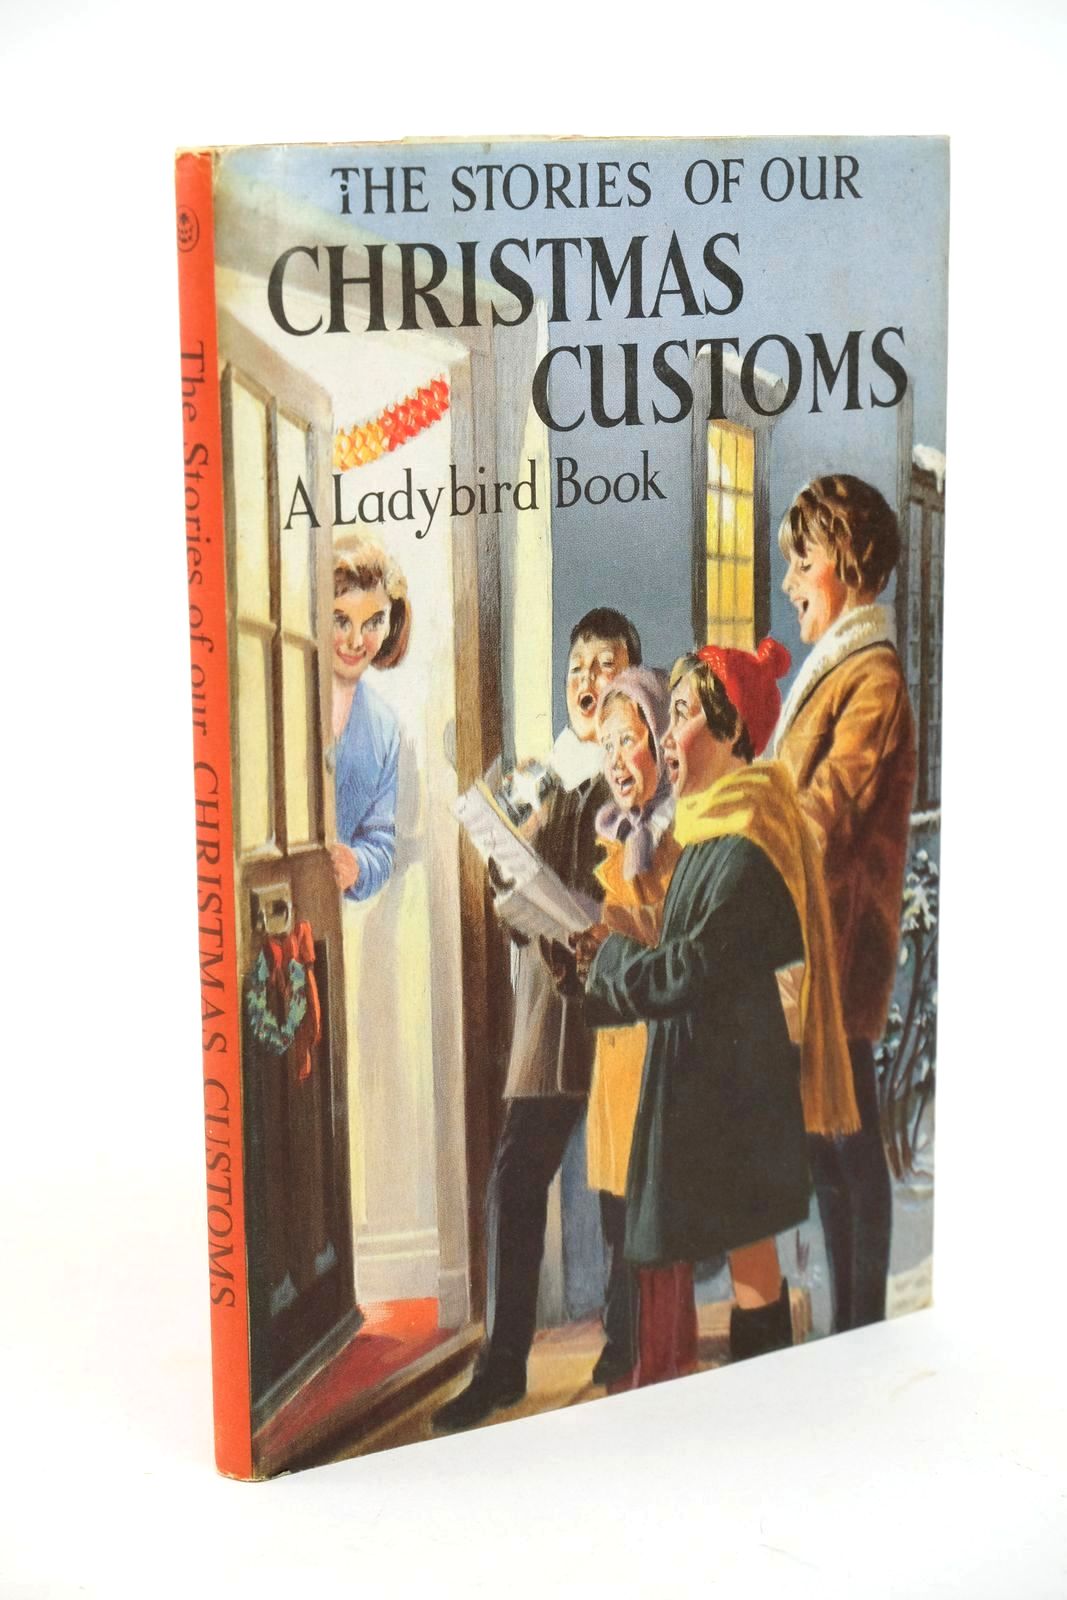 Photo of THE STORIES OF OUR CHRISTMAS CUSTOMS written by Pearson, N.F. illustrated by Hampson, Frank published by Wills & Hepworth Ltd. (STOCK CODE: 1323154)  for sale by Stella & Rose's Books